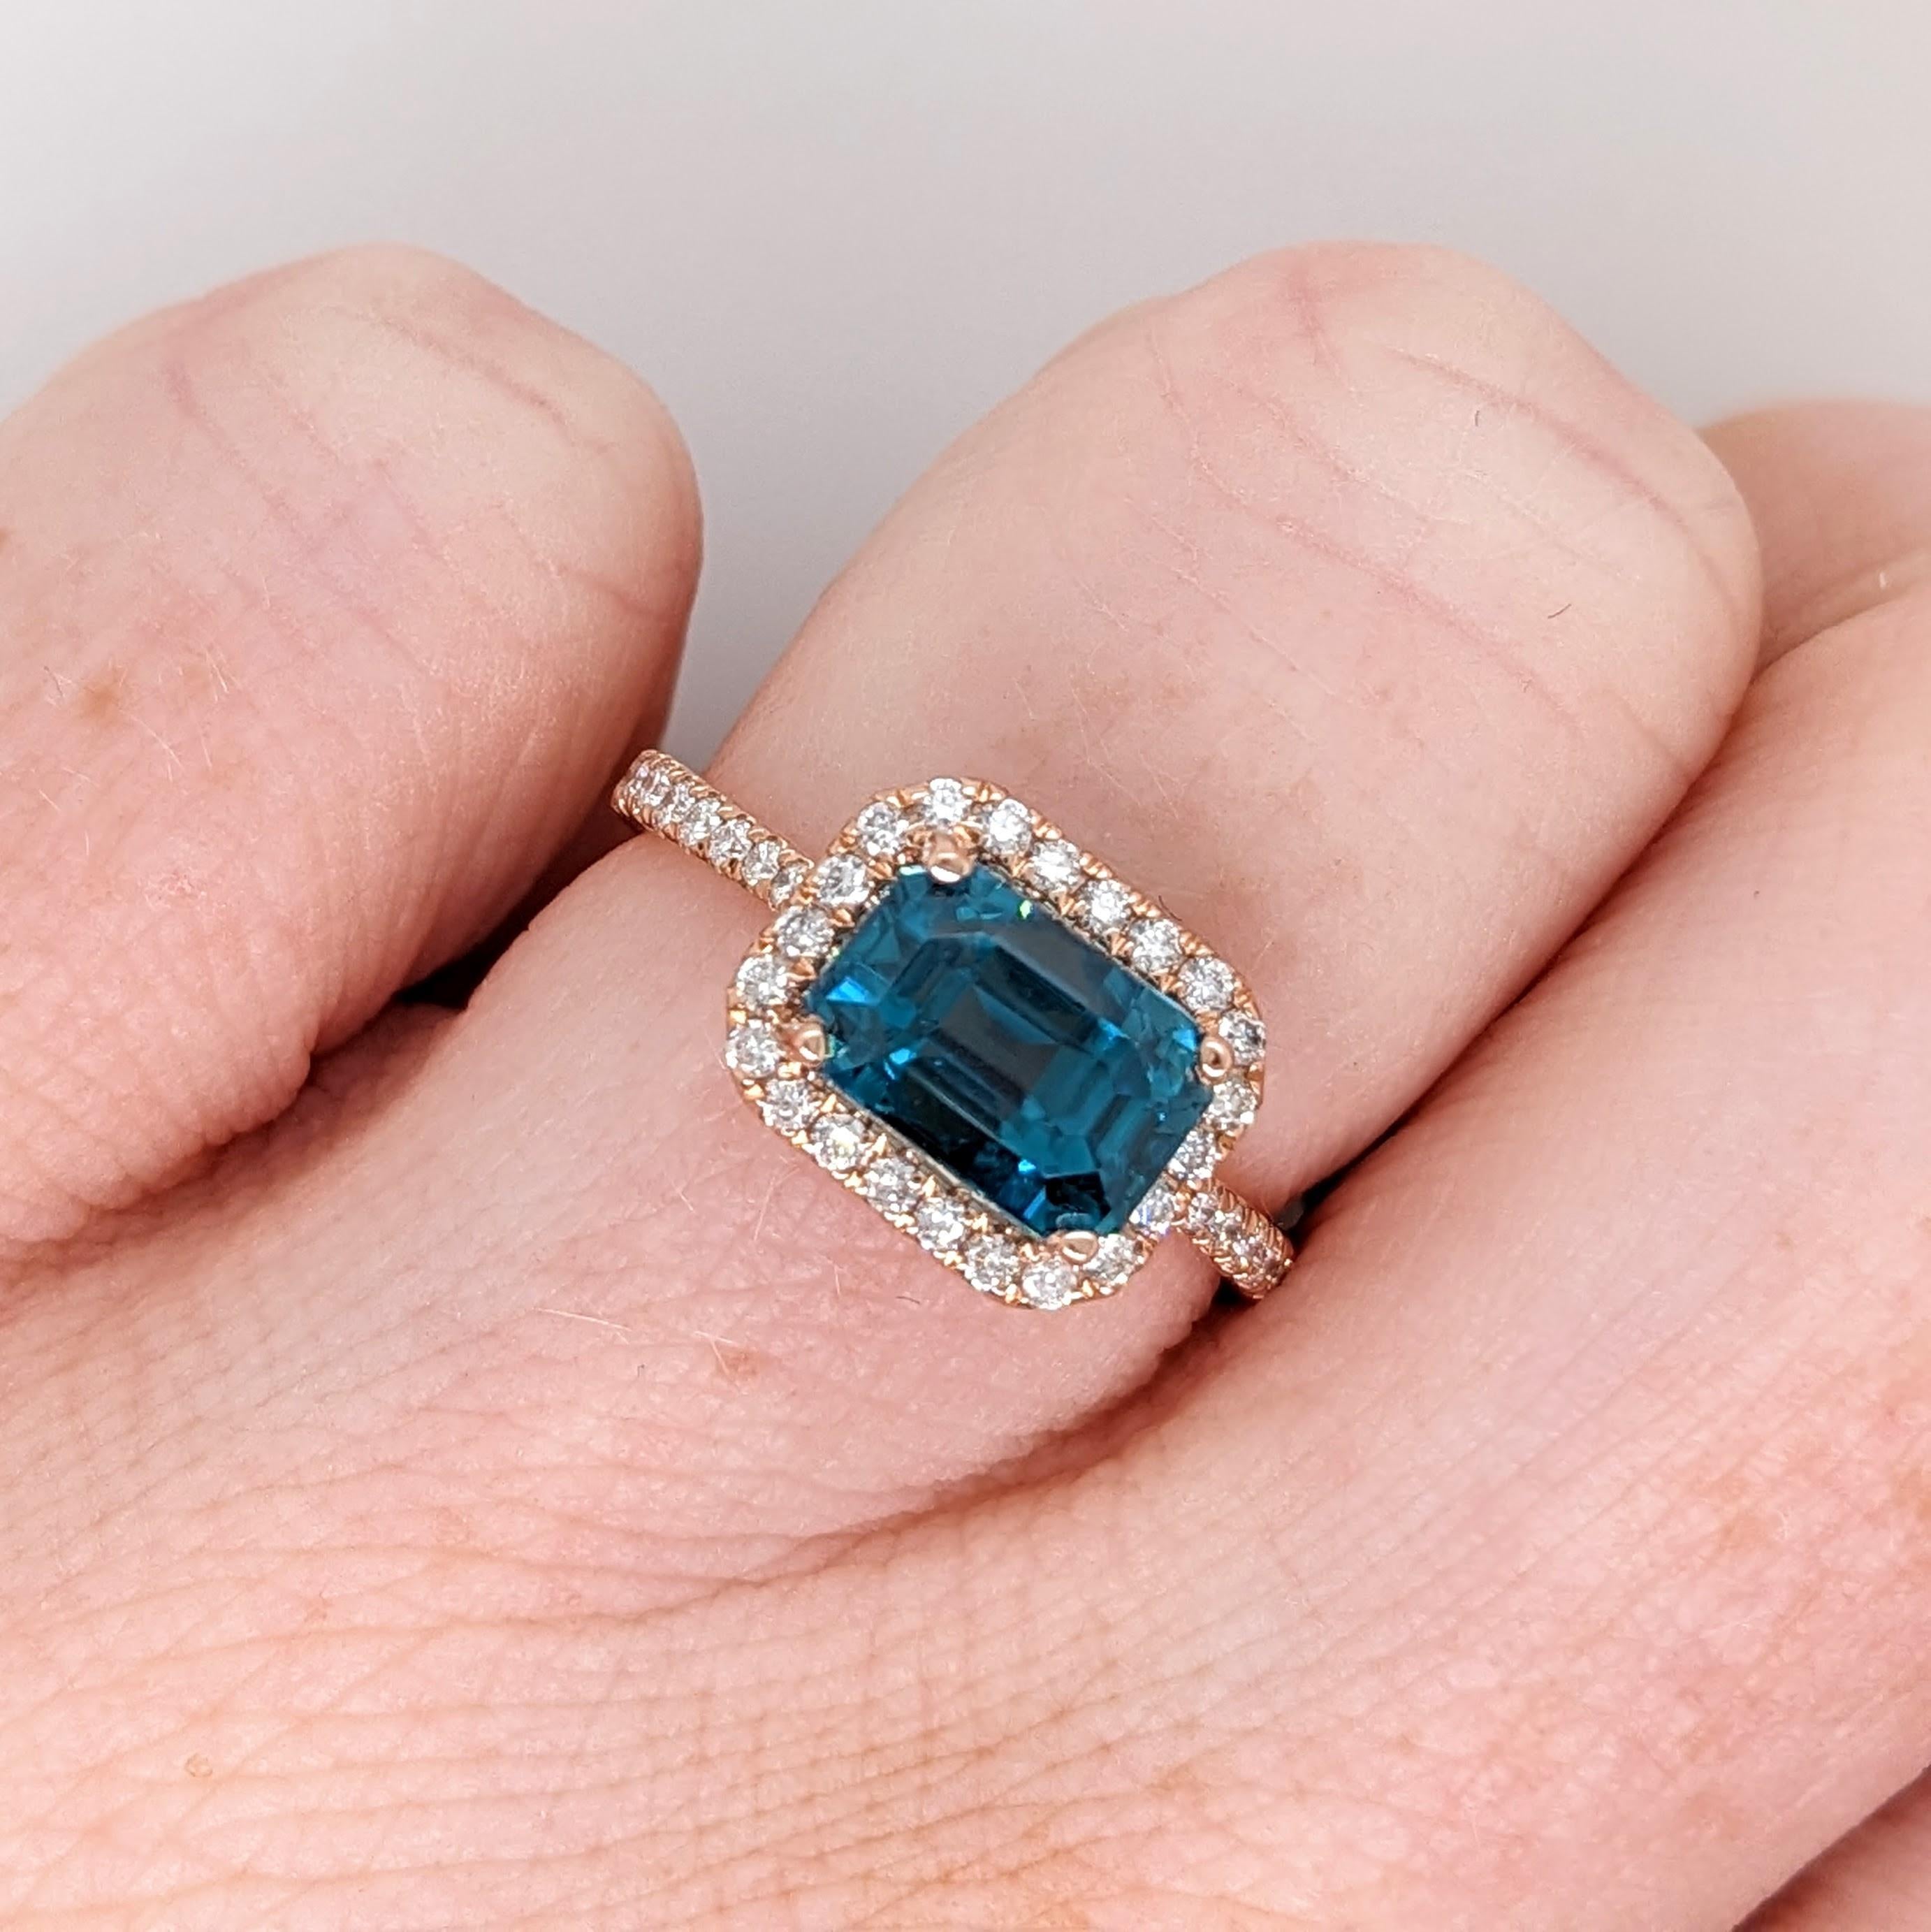 Claim this captivating natural blue zircon for yourself or your loved ones! A masterpiece of nature set in one of our most popular NNJ ring designs made in solid 14K gold with natural diamonds. A gorgeous ring for a modern bride, a December baby, or